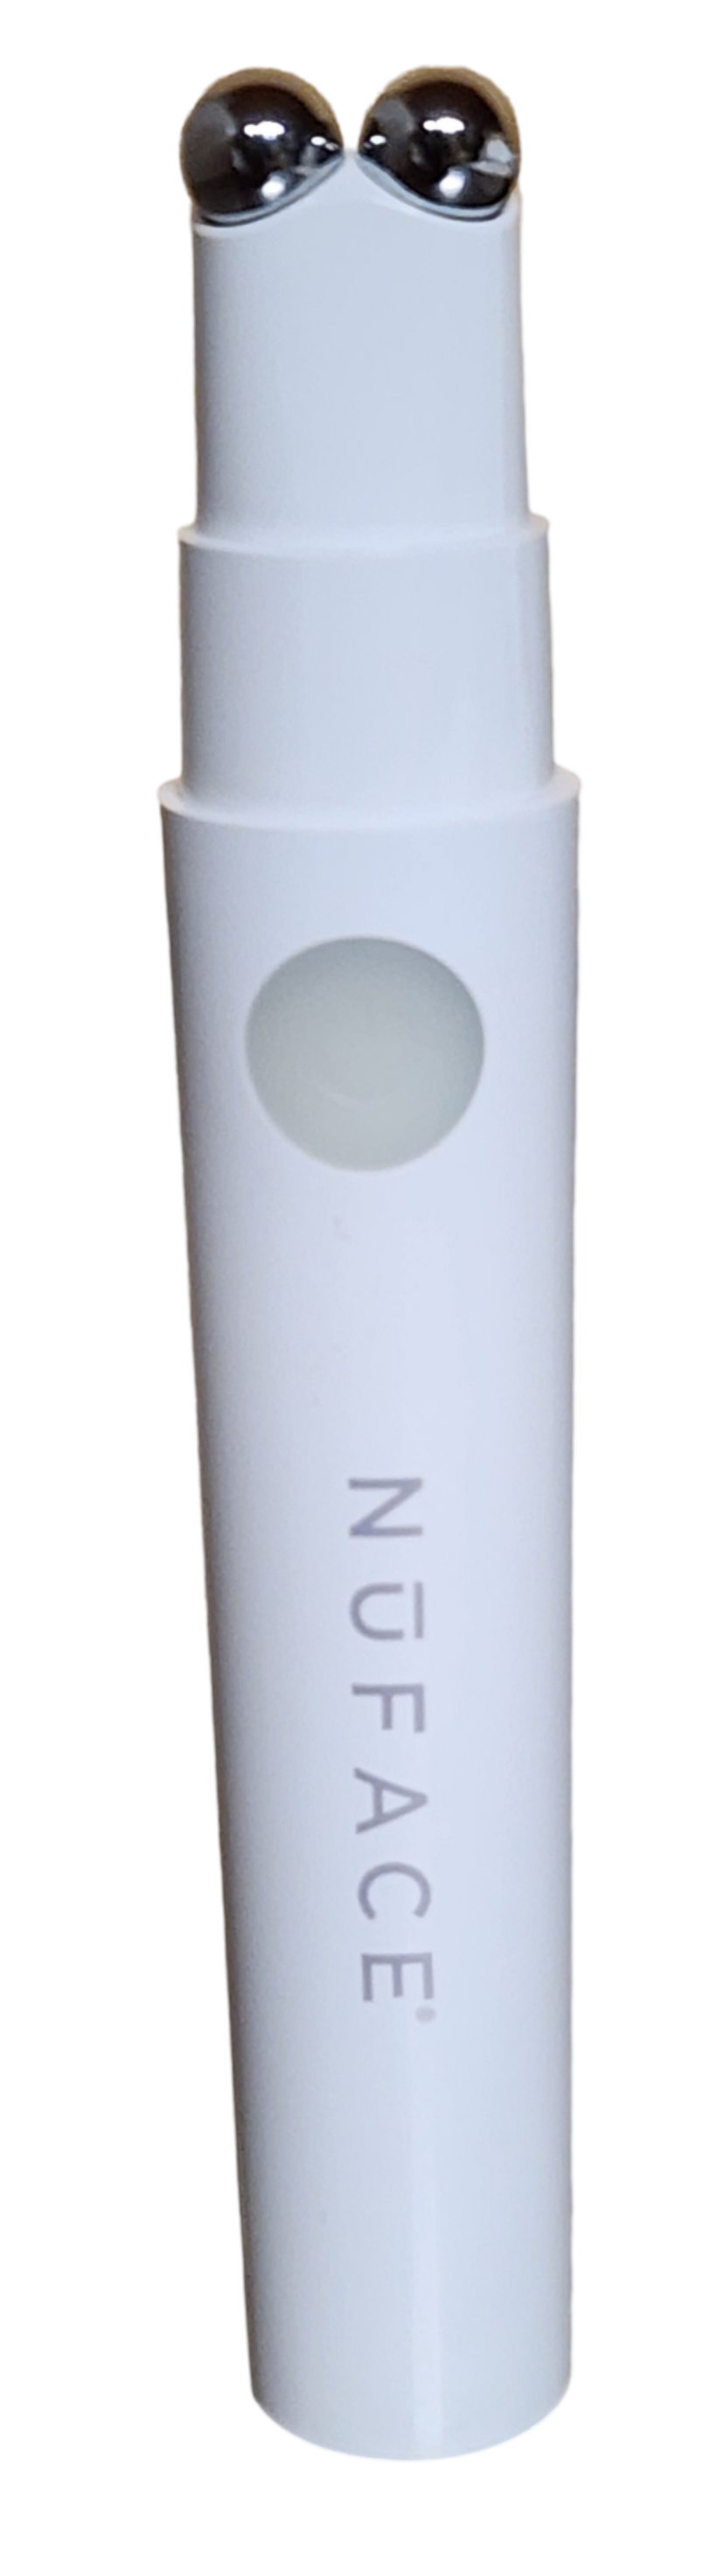 Introducing the NuFACE MINI+ Device, your petite, smart microcurrent skincare regimen! Shape your face on the go with this clinically proven, FDA-Cleared device.